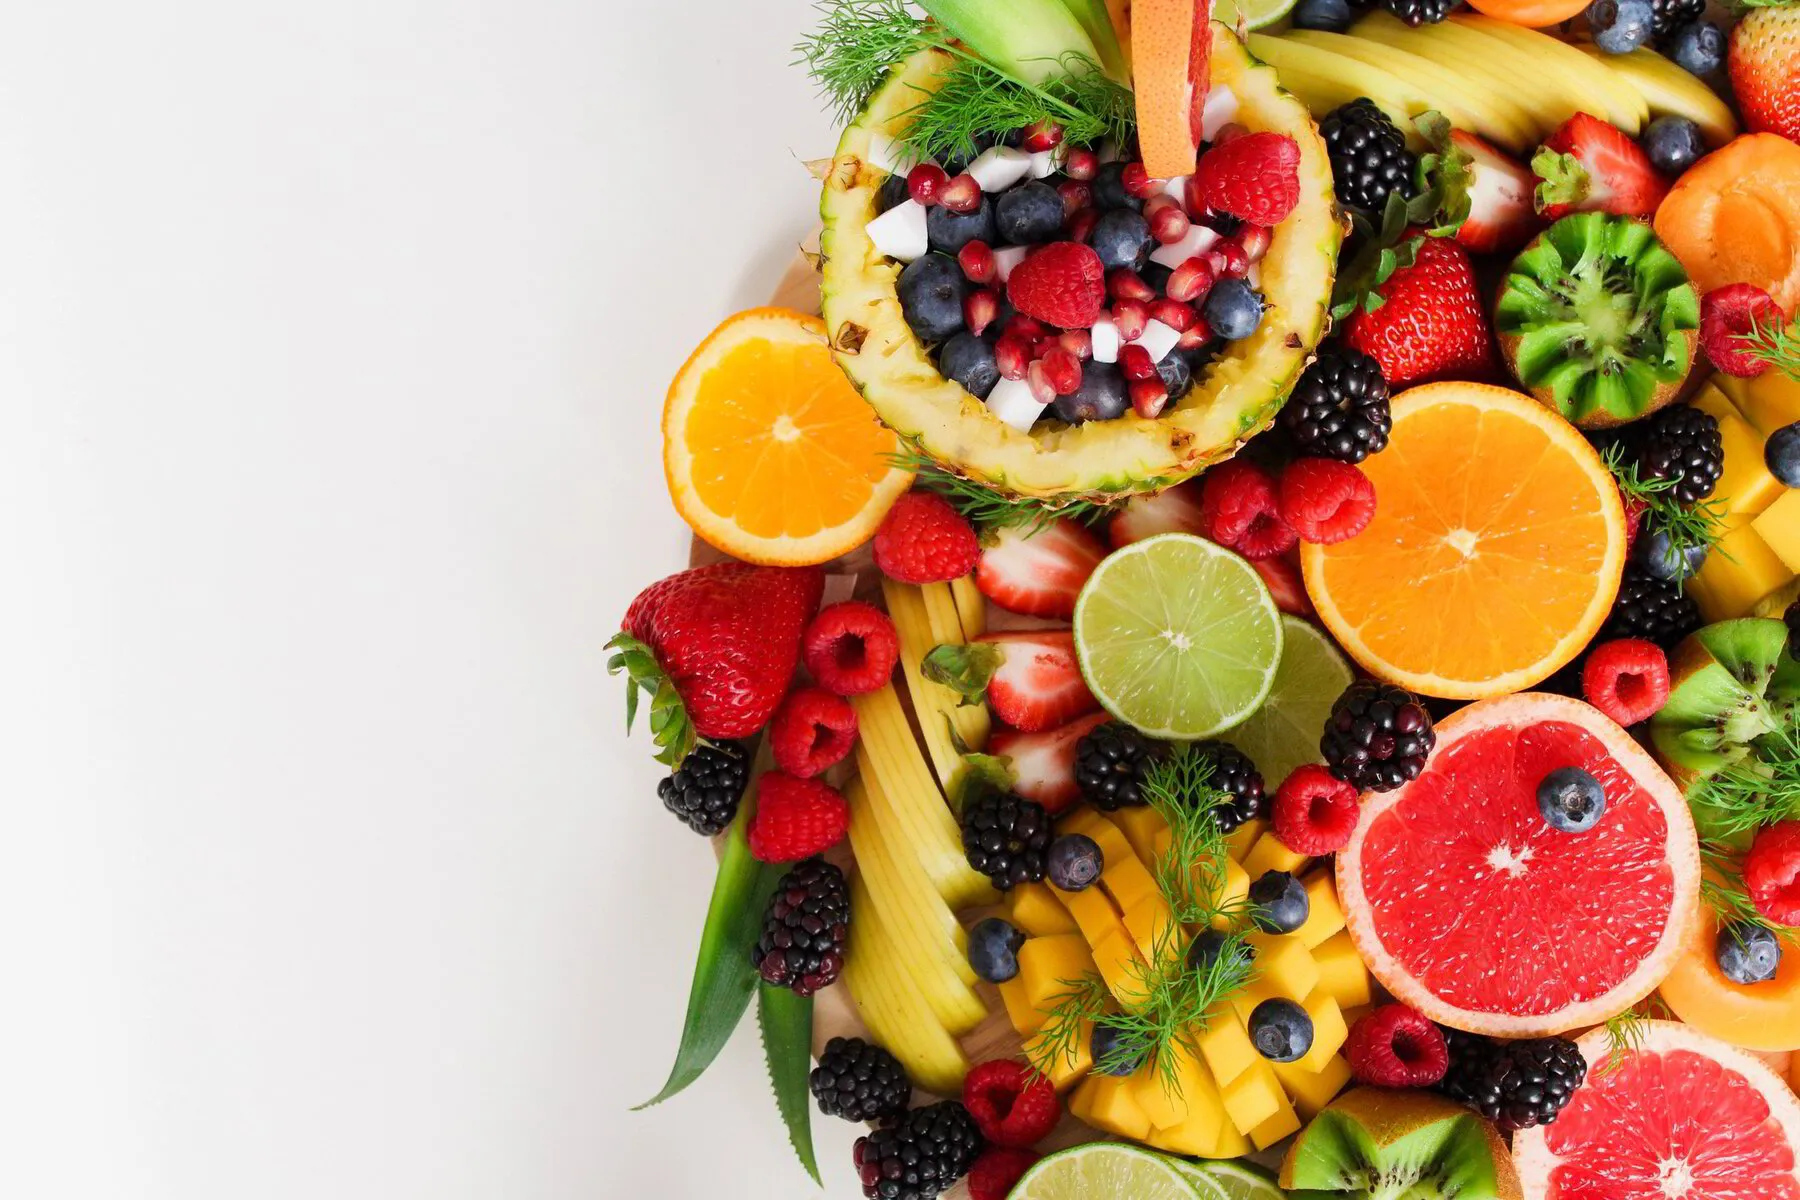 Chiropractic Care and Nutrition